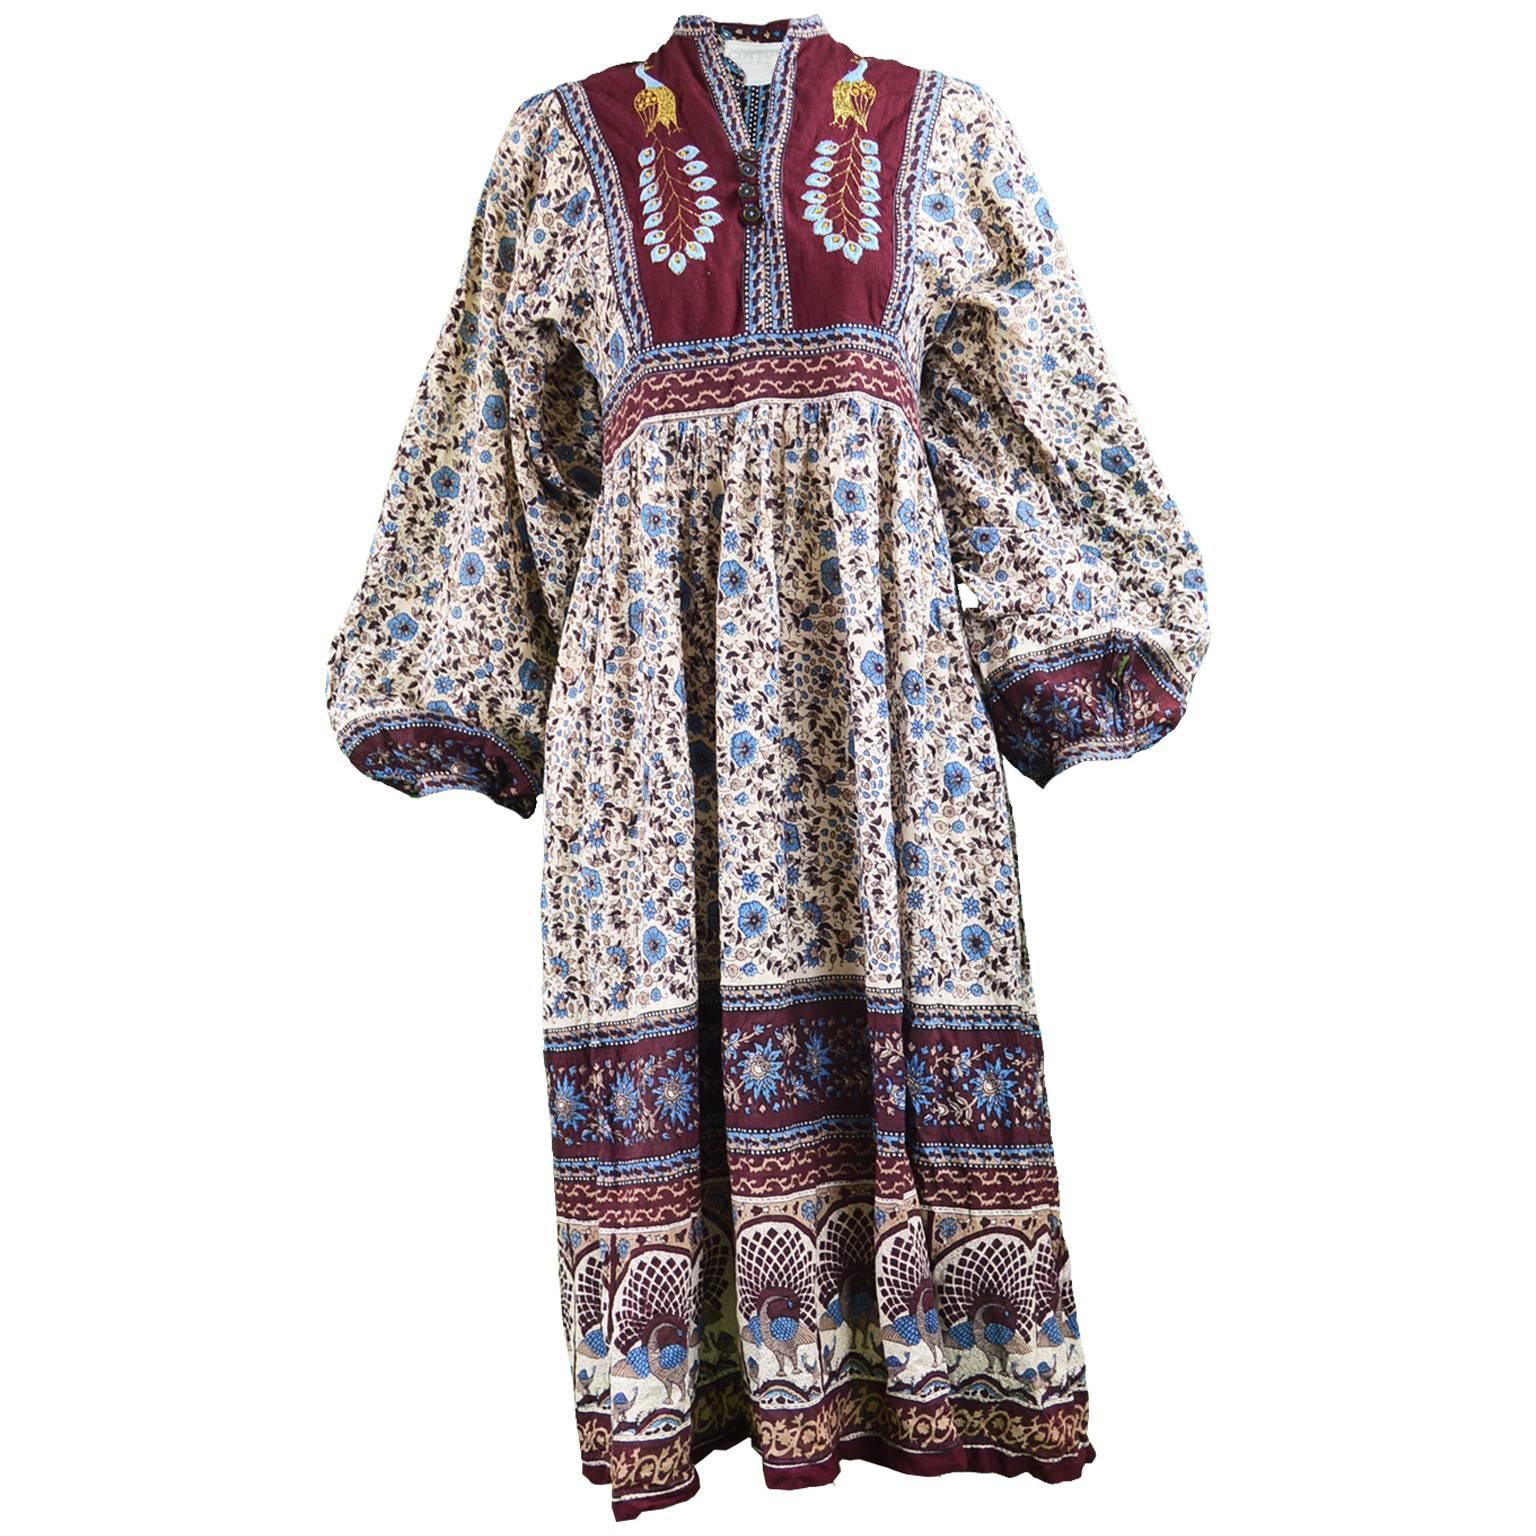 Vintage 1970s Indian Cotton Gauze Block Print Dress with Balloon Sleeves